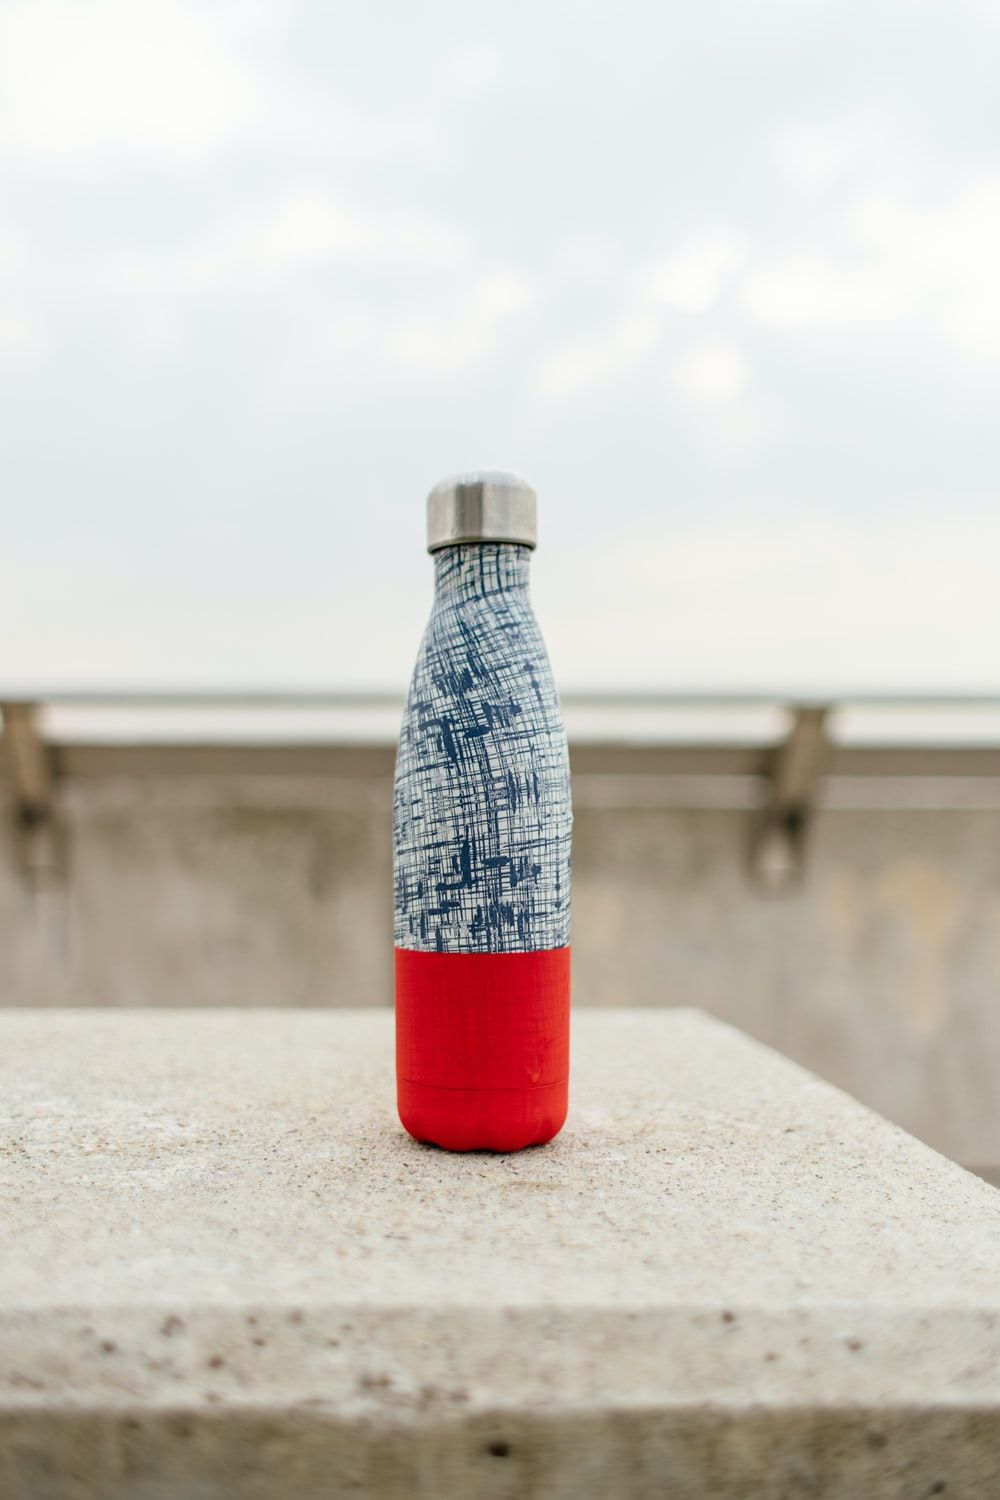 Water Bottle Picture [HQ]. Download Free Image